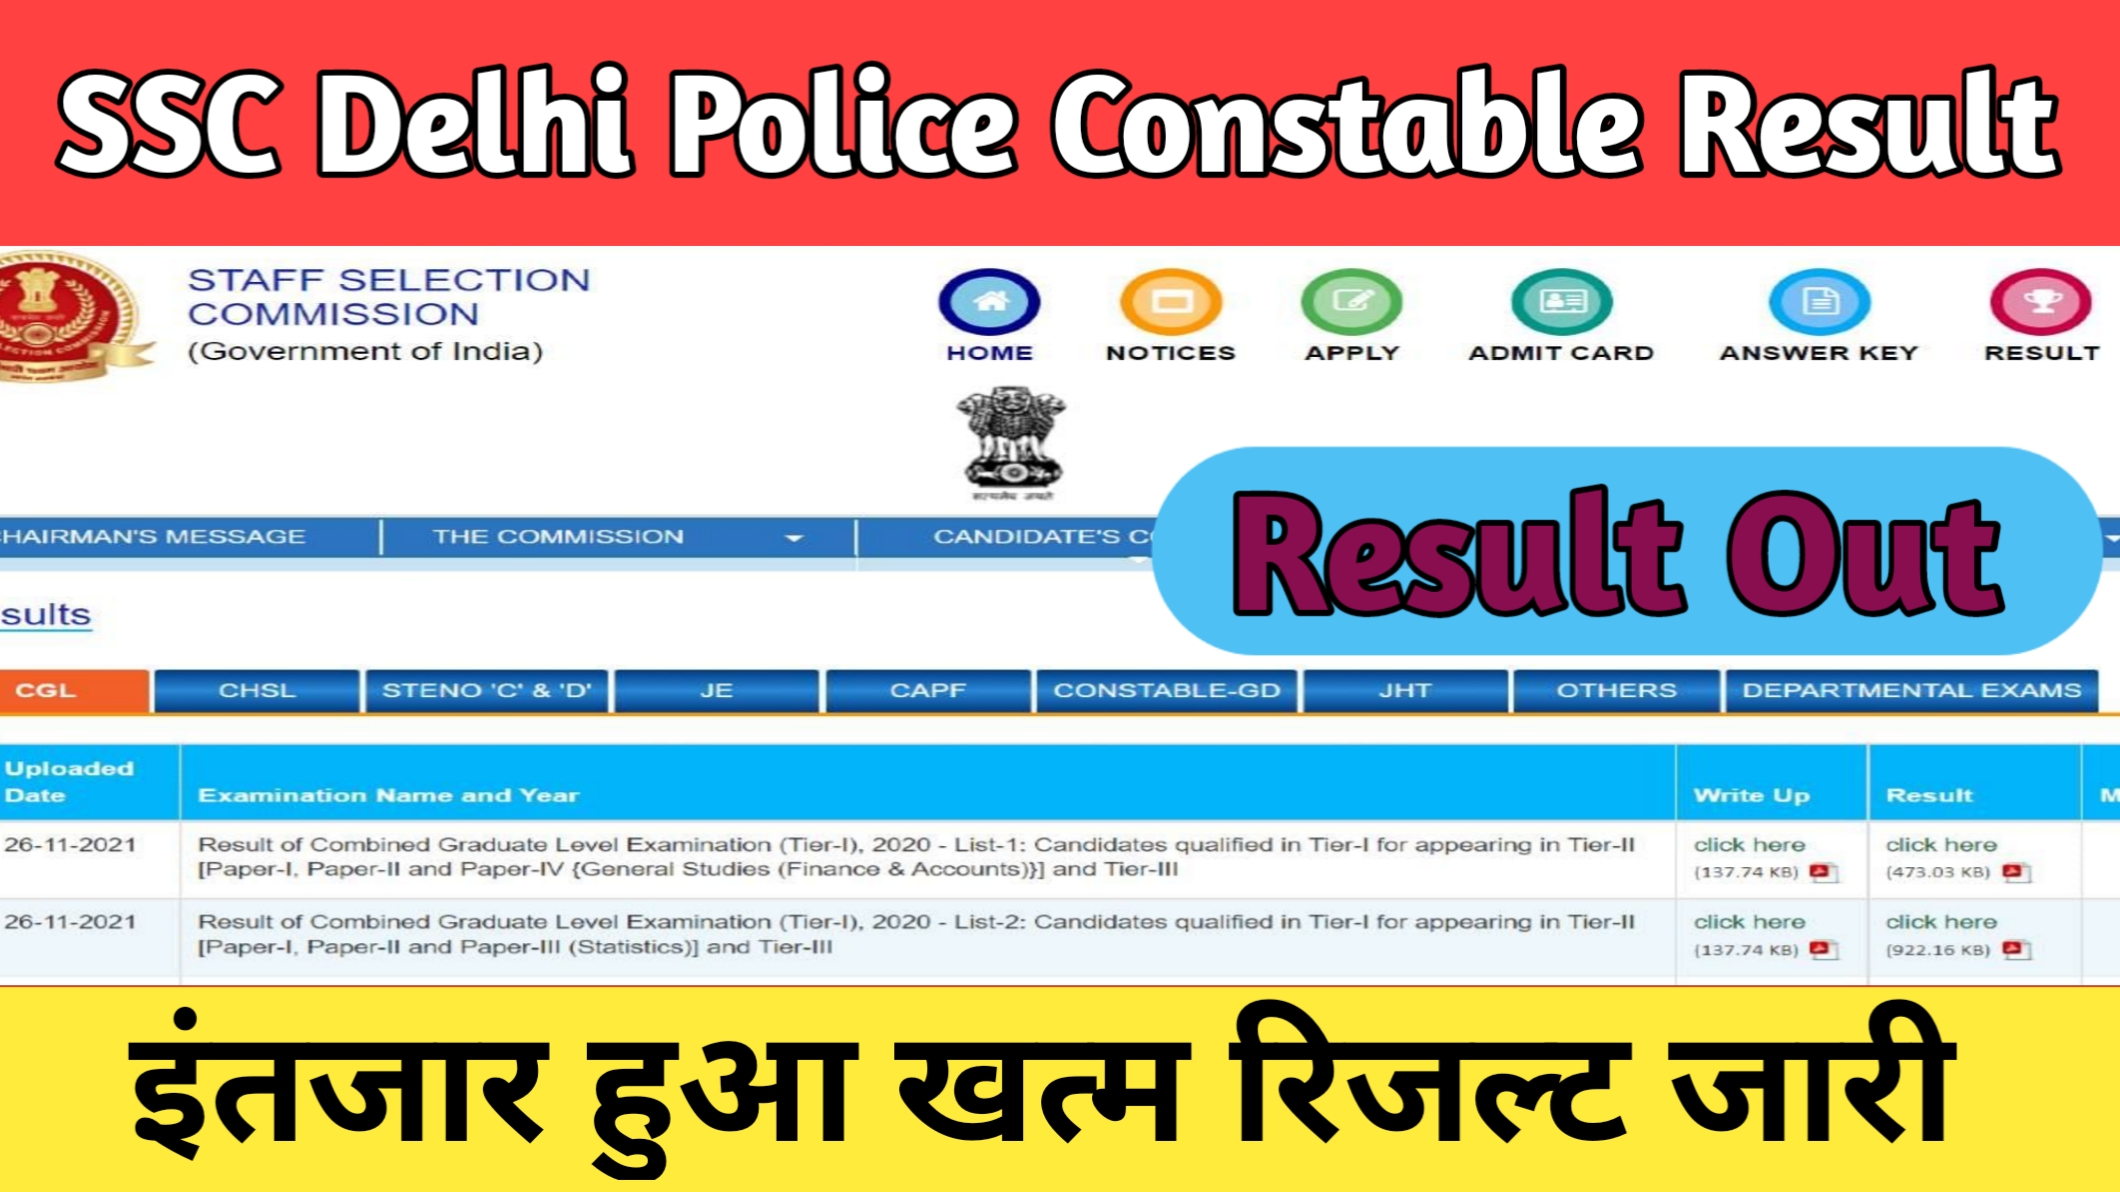 SSC Delhi Police Constable Result, (Check Out)